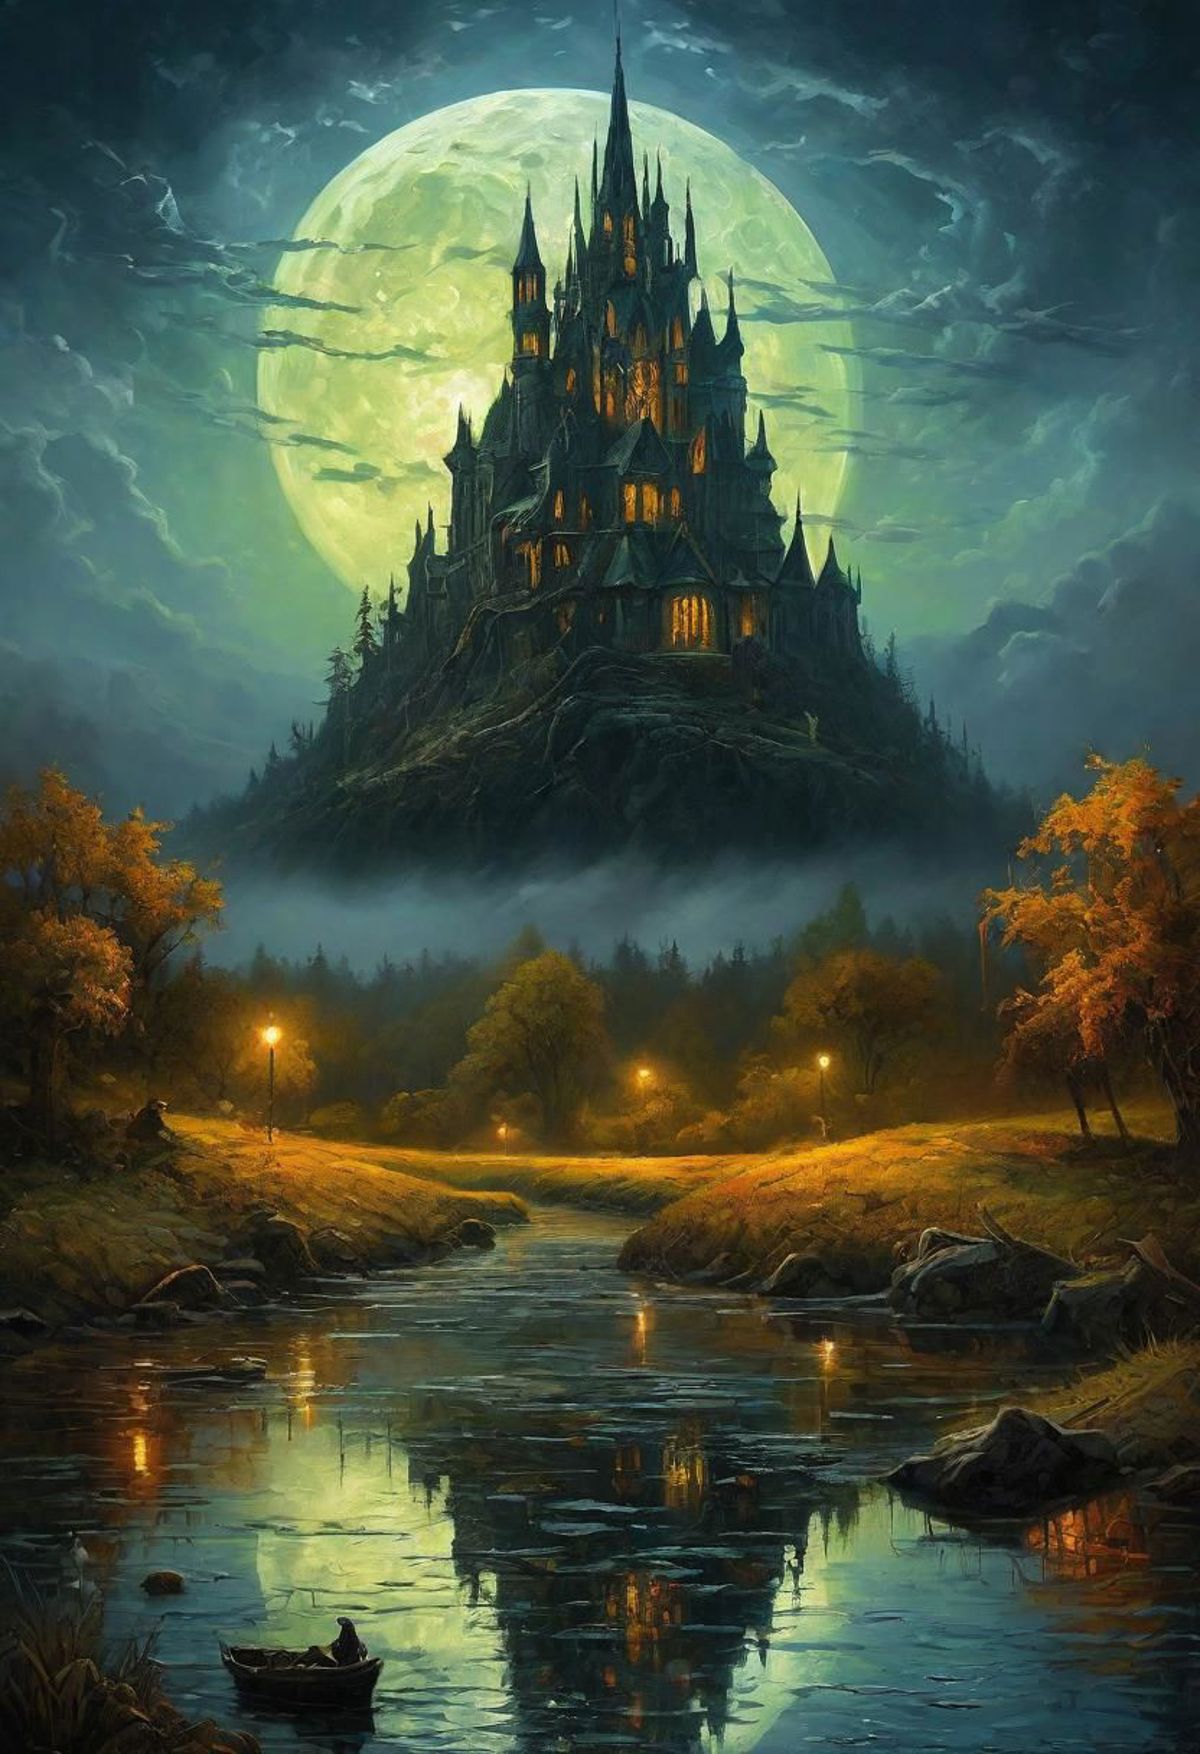 A painting of a castle with a full moon at night, surrounded by trees and a river.